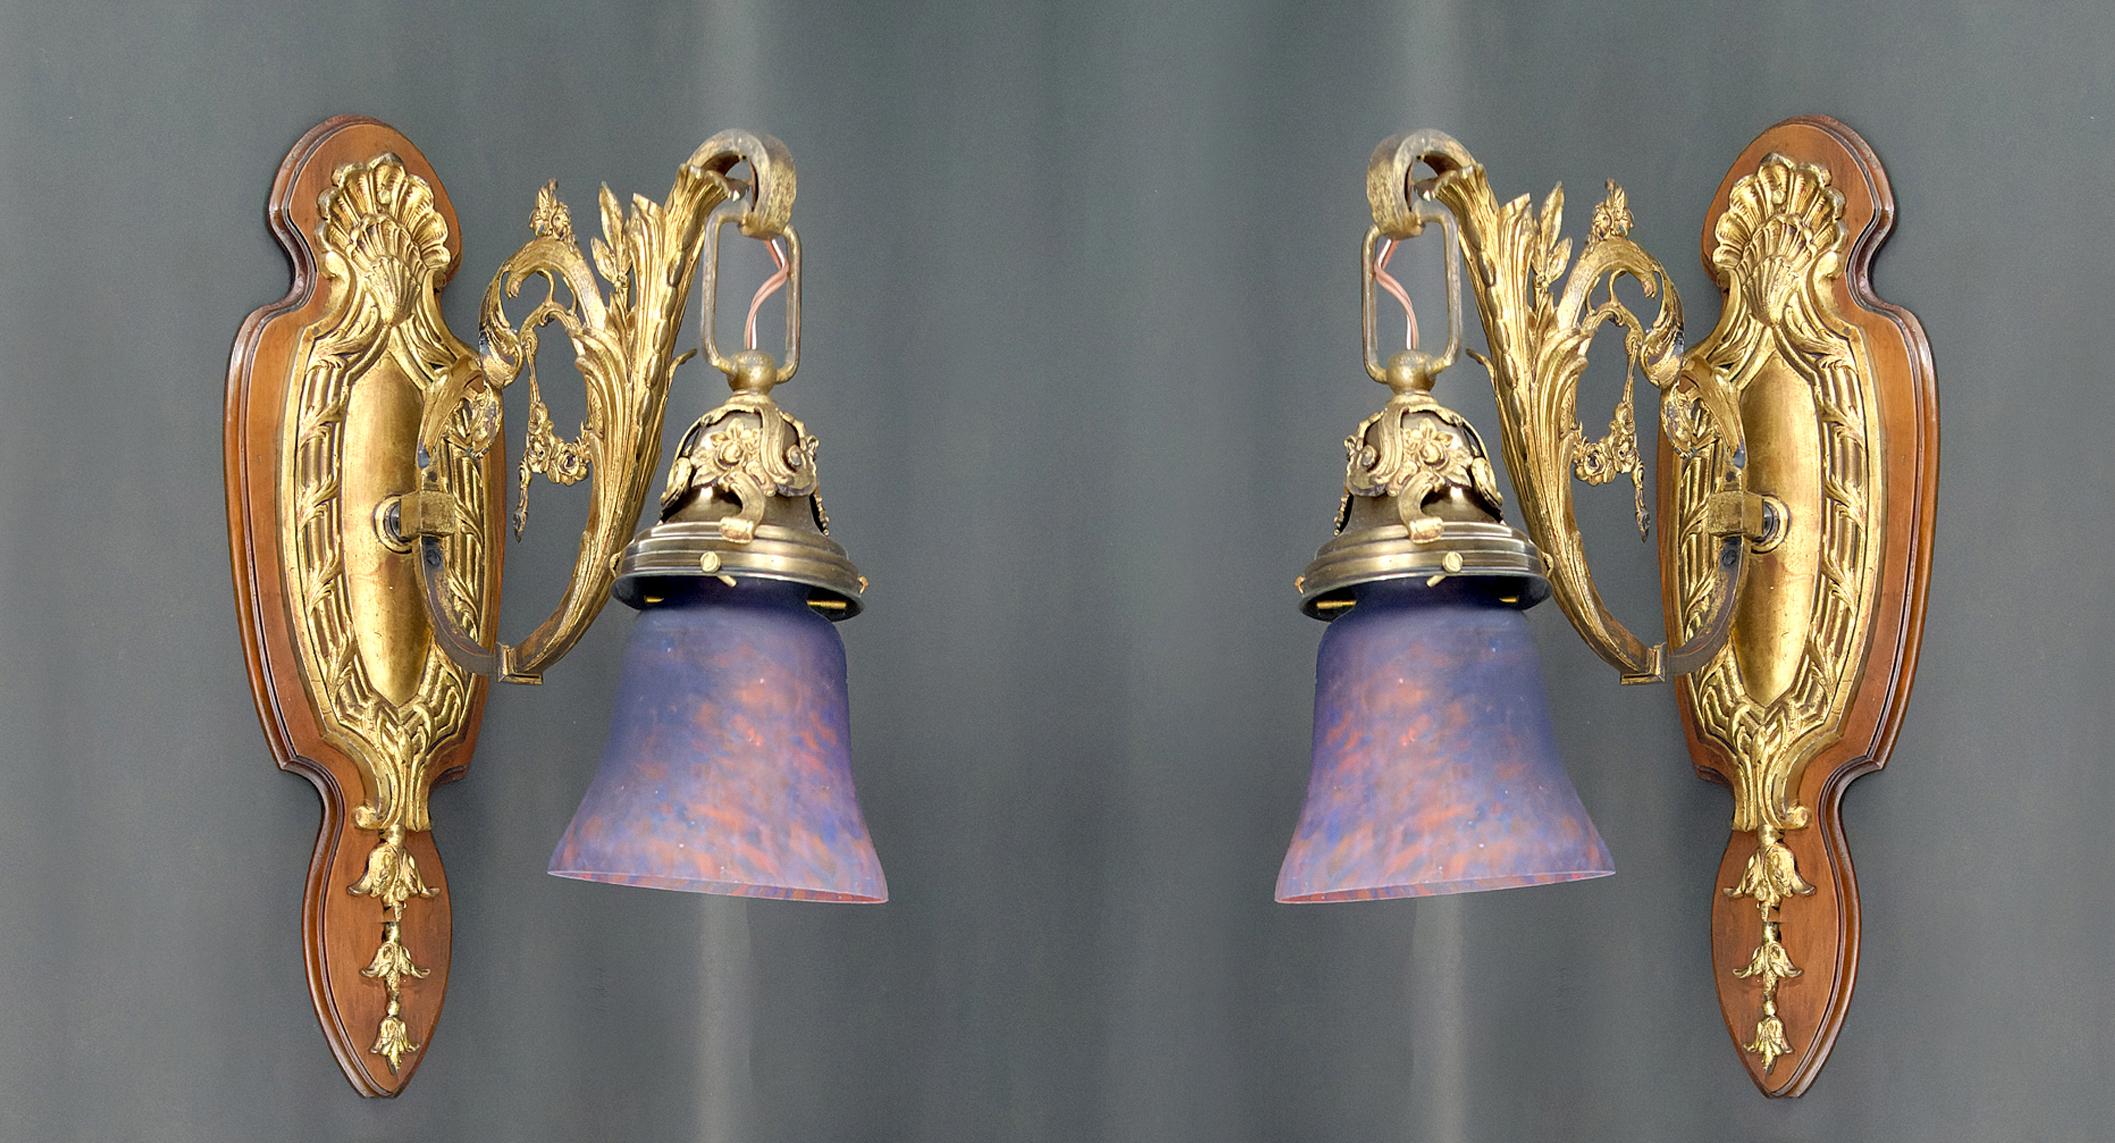 Superb and rare pair of Rococo / Louis XV style wall sconces in gilded bronze, walnut bases and very beautiful 